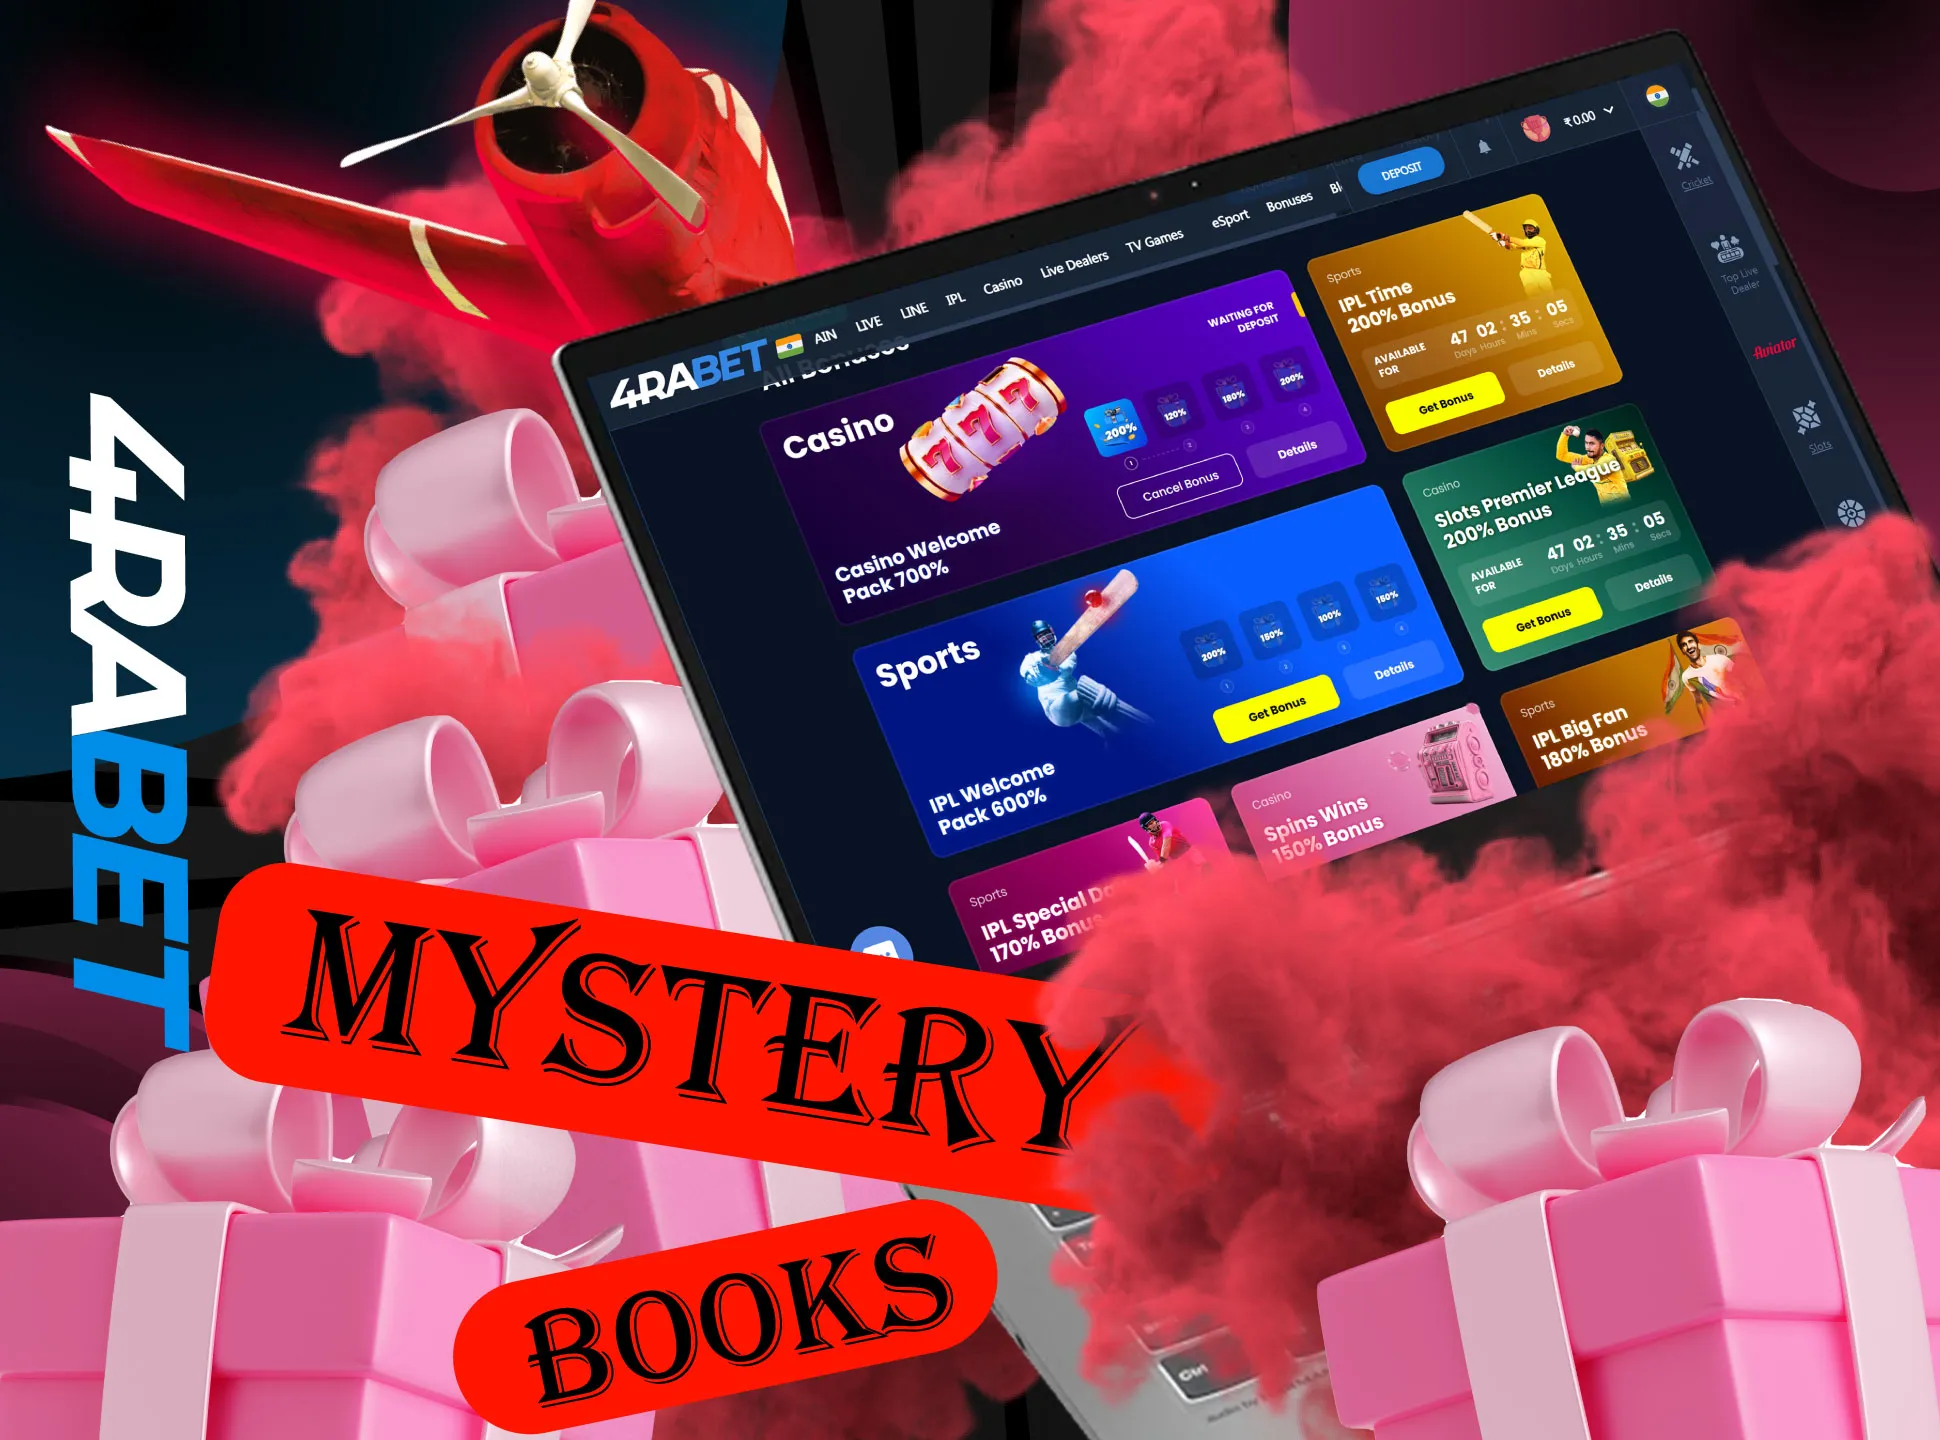 Get a 100$ bonus on your deposit on playing the Mystery Books game.